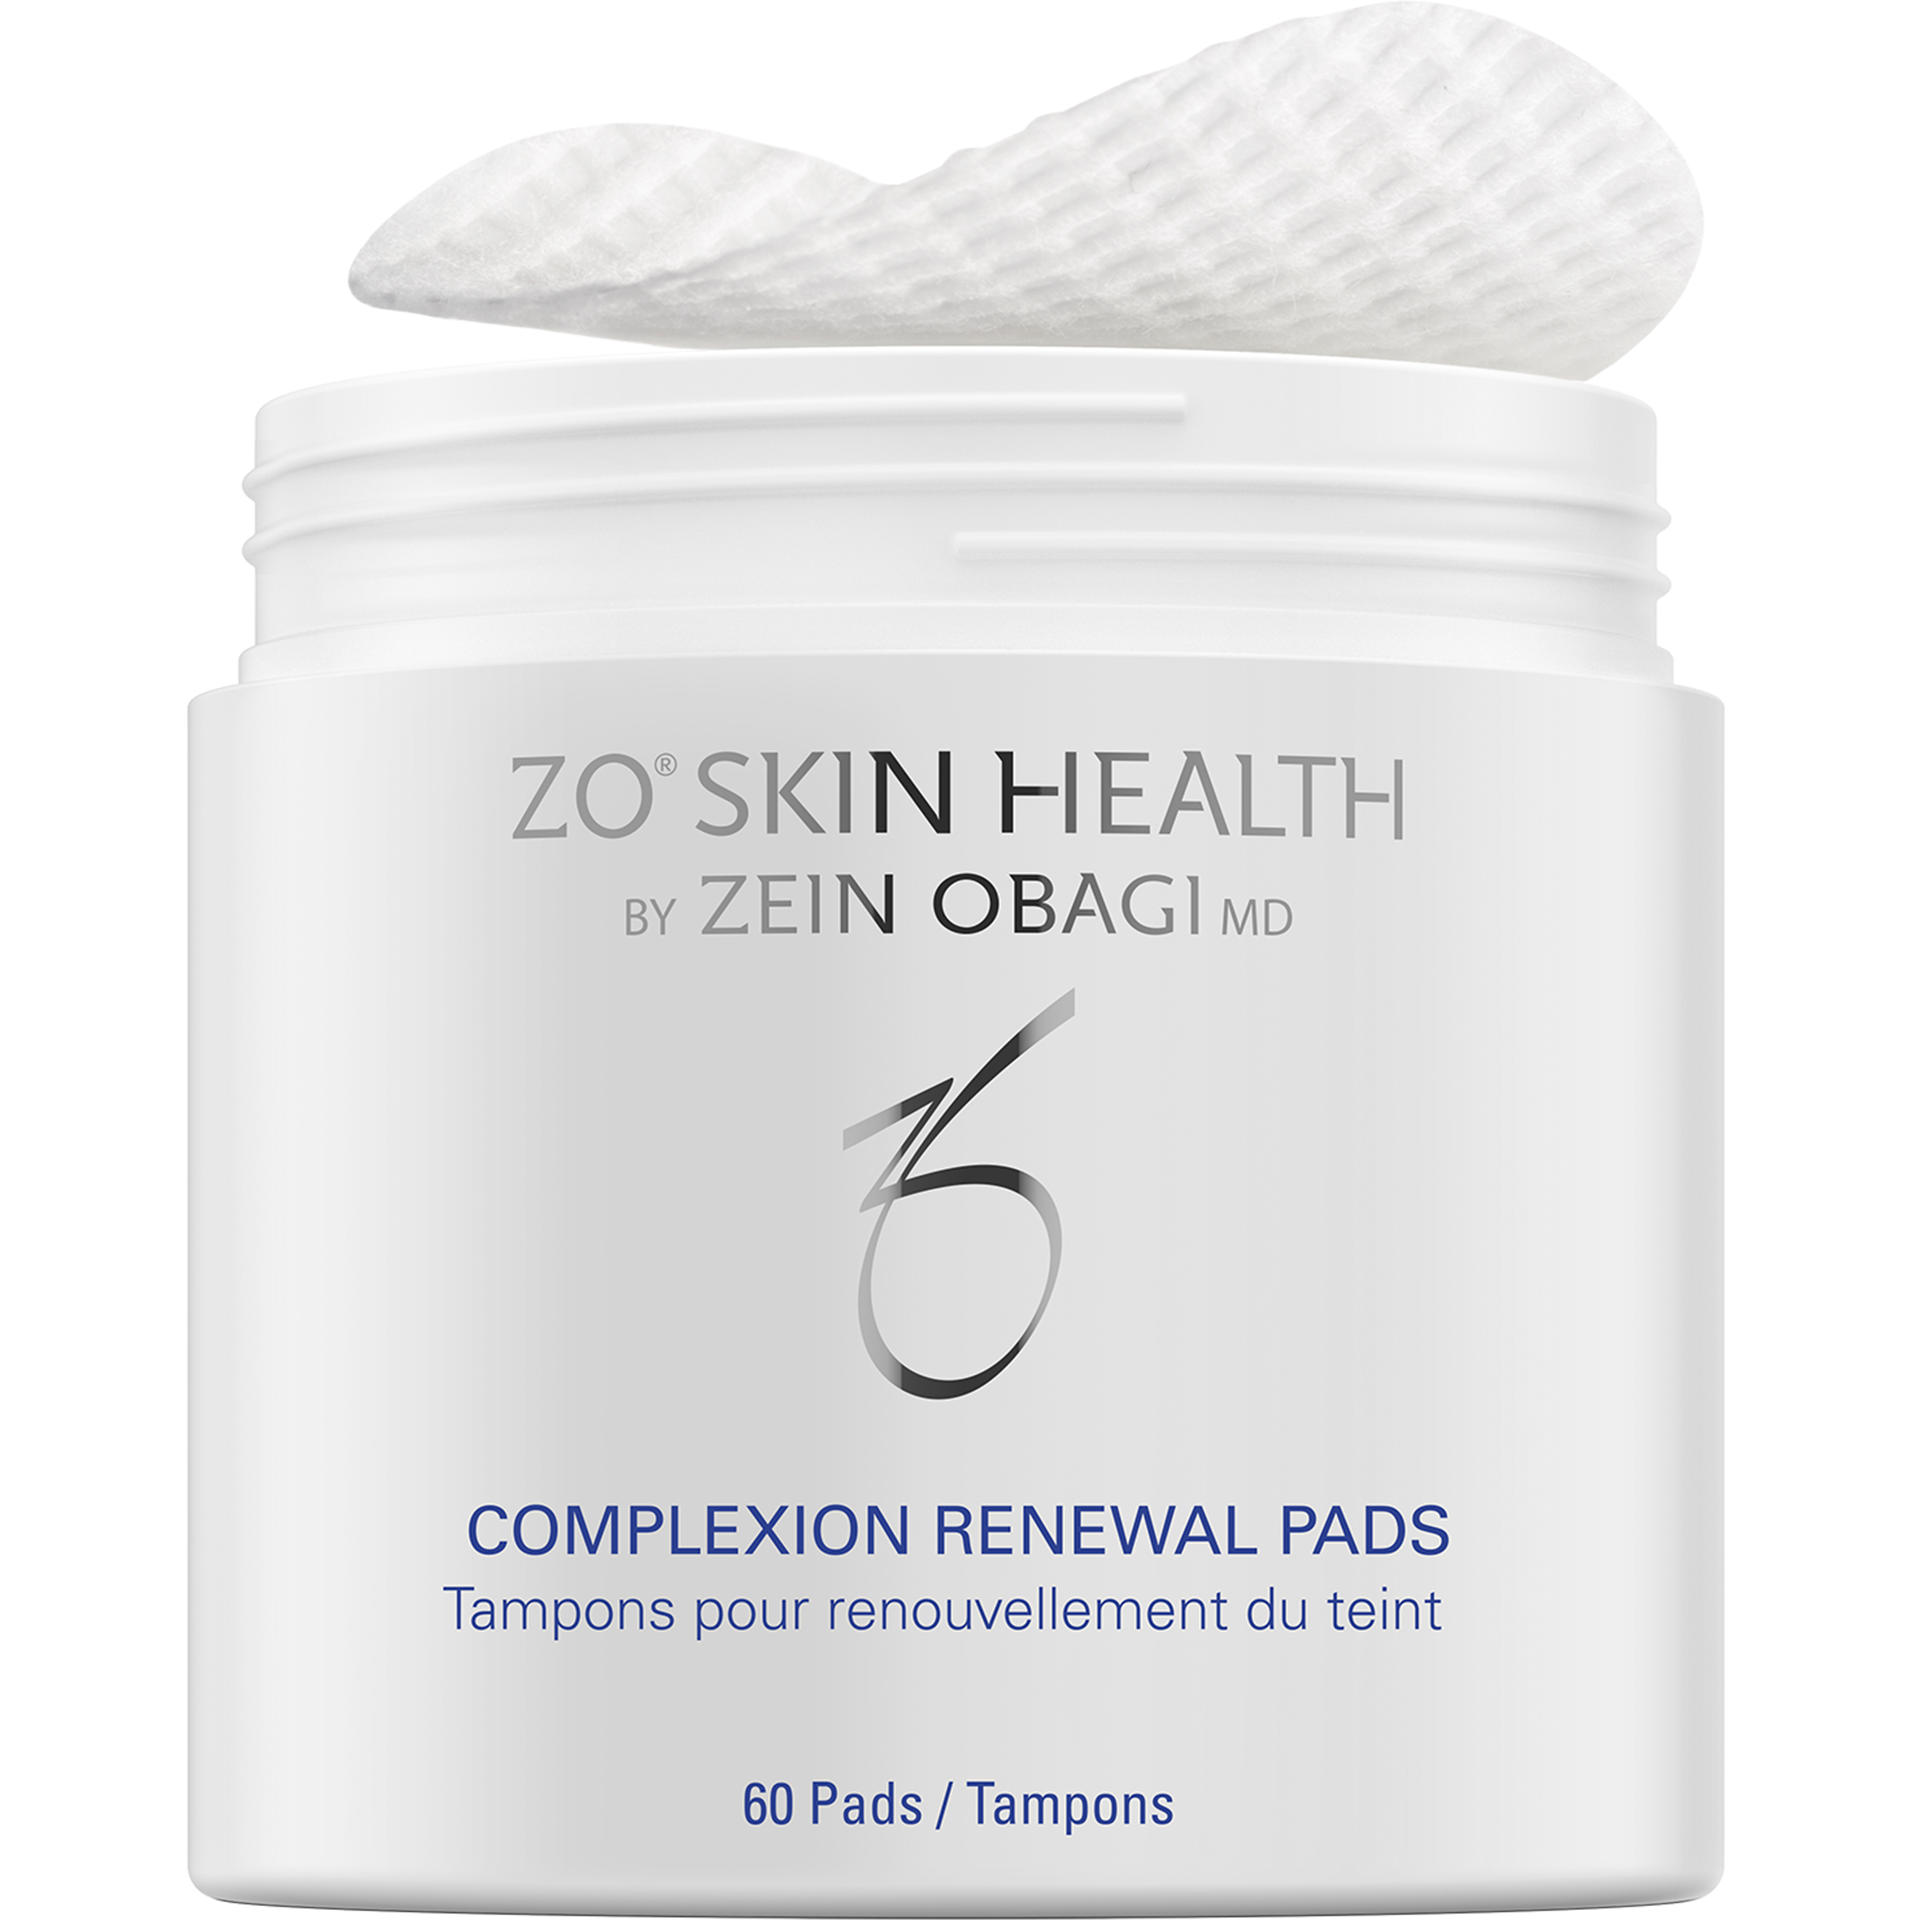 Complexion Renewal Pads - 60 Pads